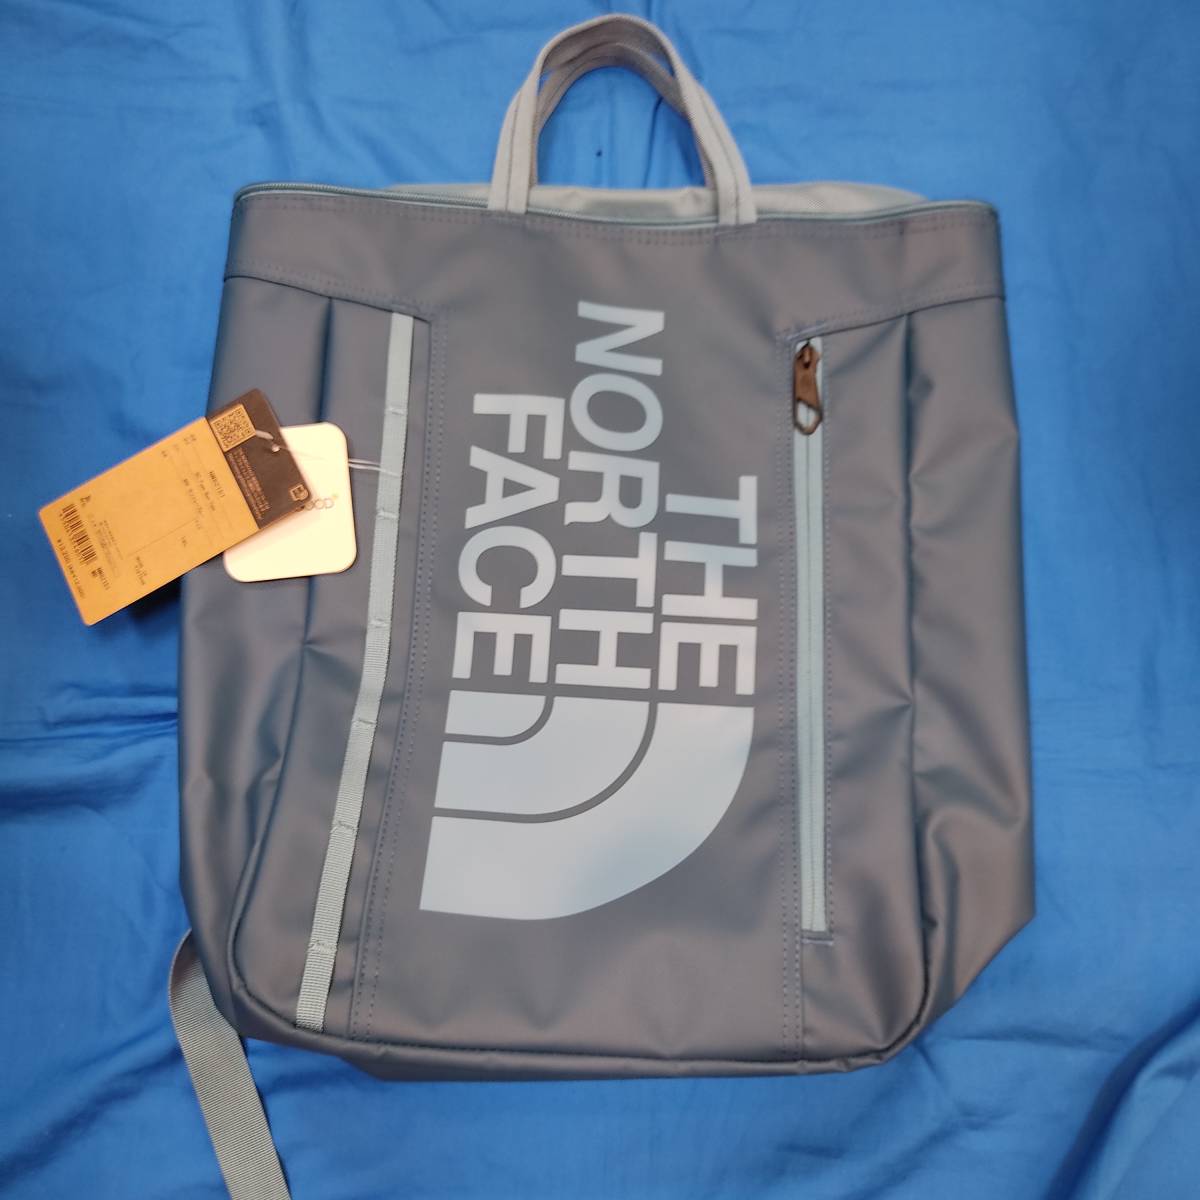  unused tag attaching North Face HTE NORTH FACE North Face rucksack rucksack 19 liter light blue 2WAY